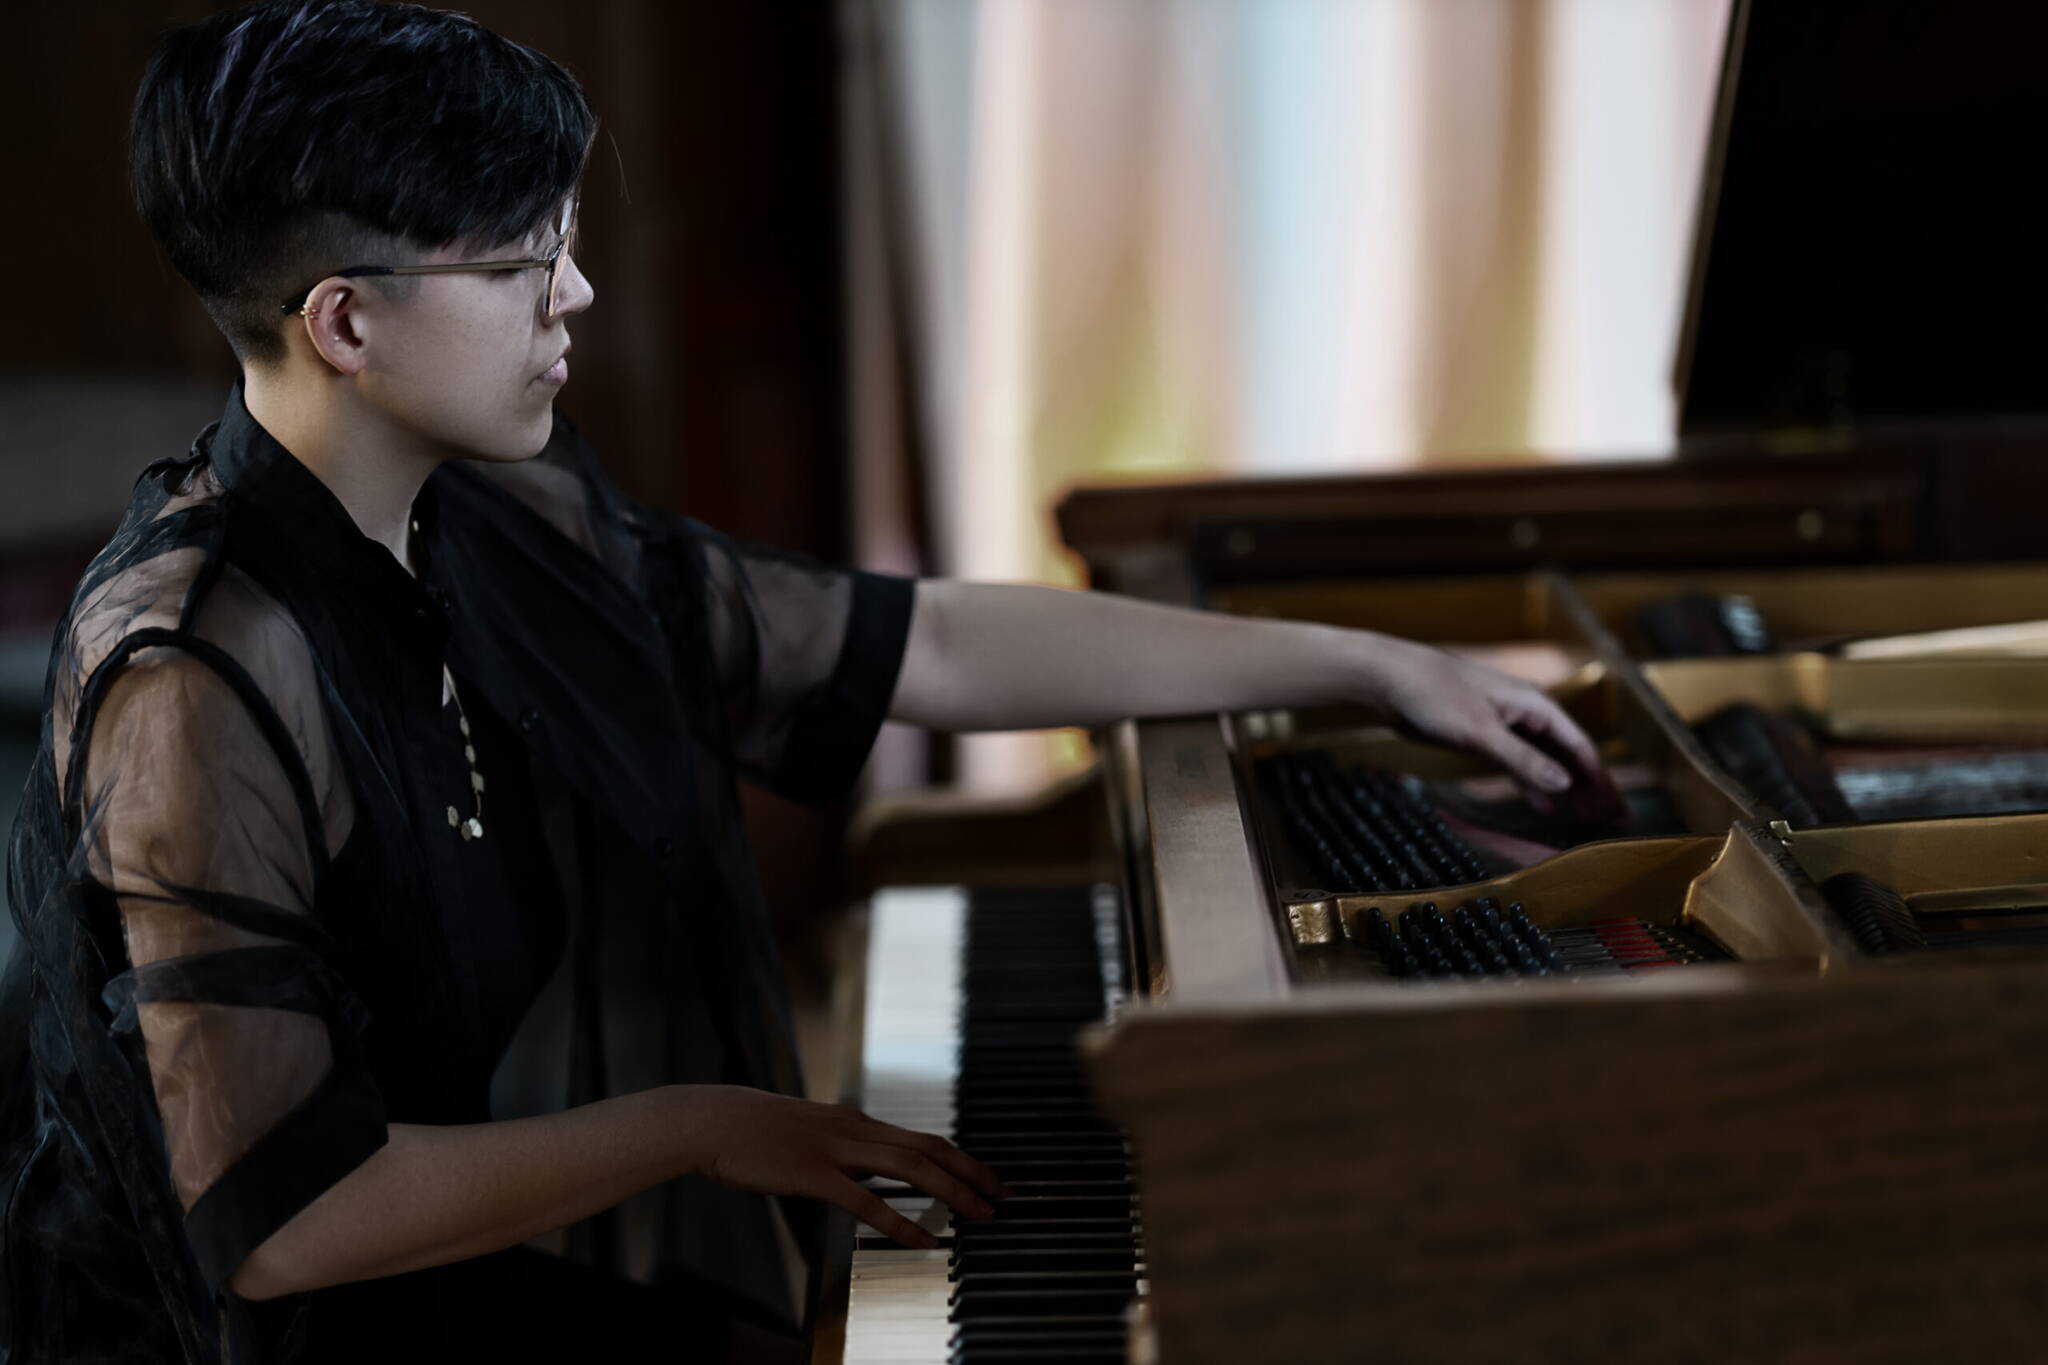 Pianist Phoebe Wu is scheduled to play a contemporary classical concert at 7 p.m. Sunday at the Juneau Arts and Culture Center, plus three other concerts in Southeast Alaska between Oct. 14-21. (Photo courtesy of Phoebe Wu)